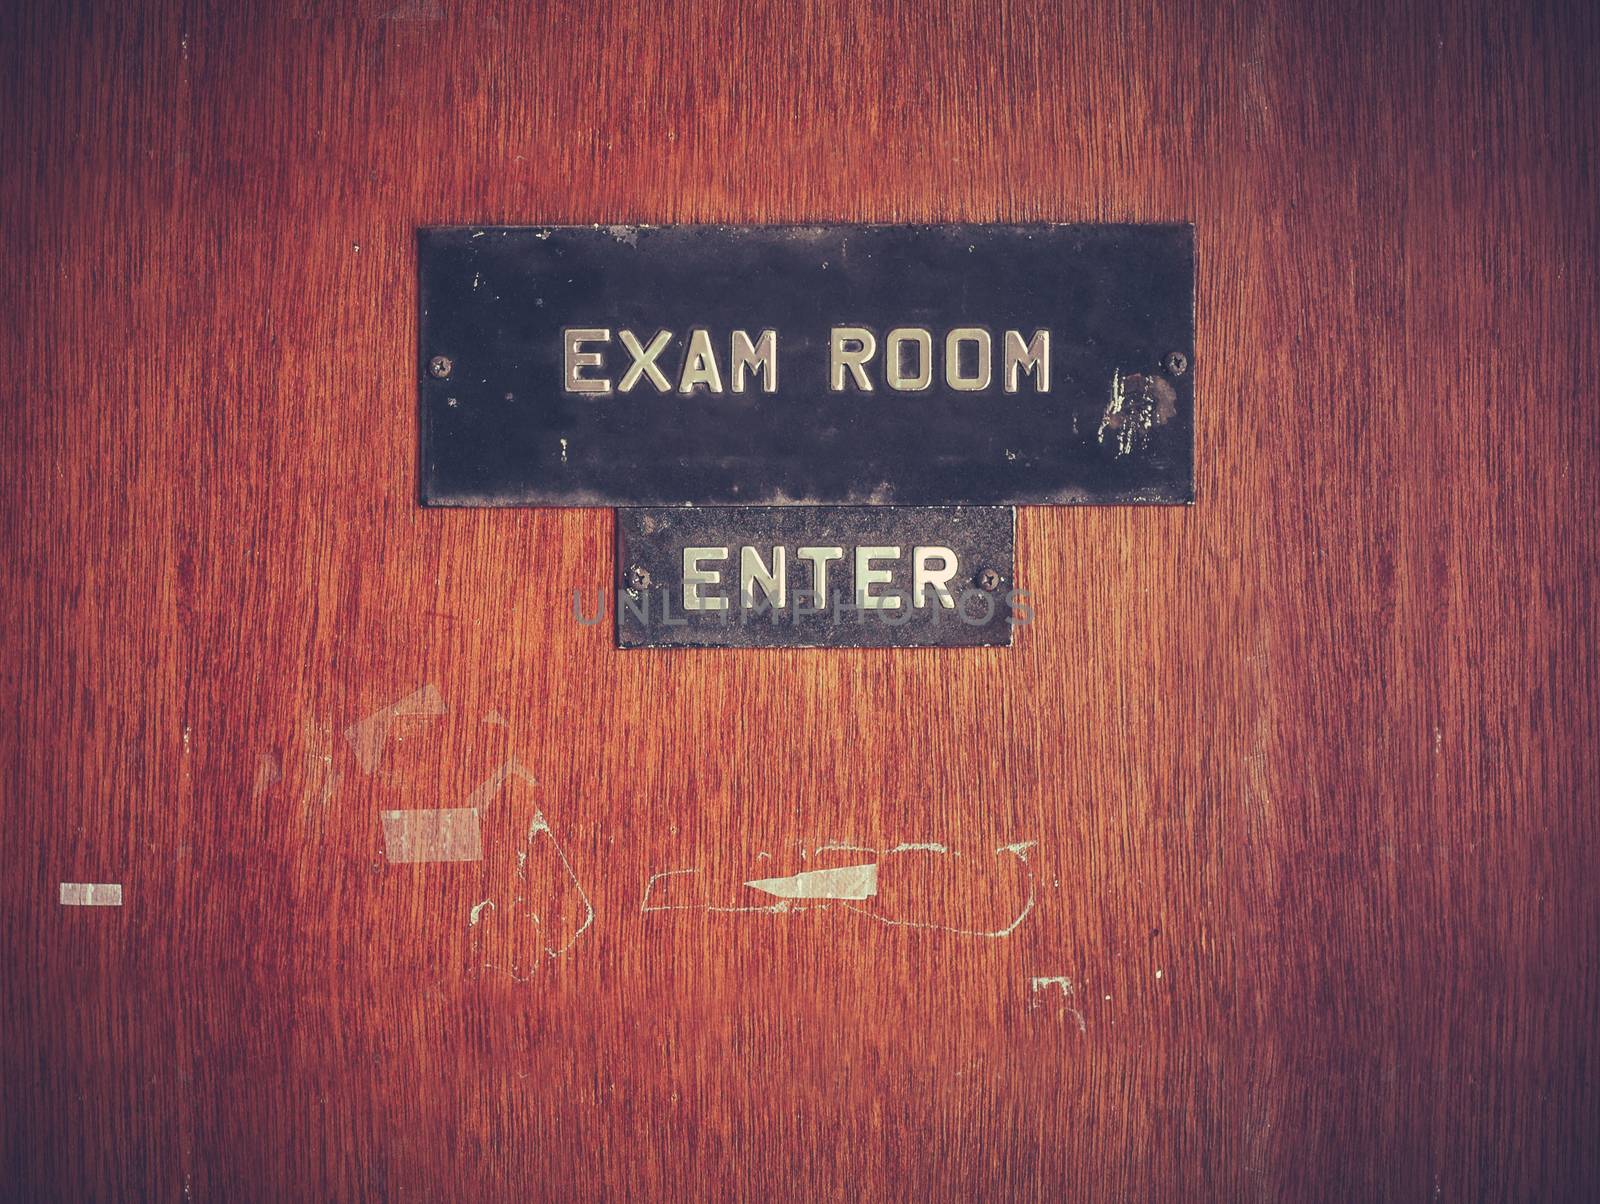 Retro Filtered Image Of A Grungy Exam Room Door At A Public School In The USA